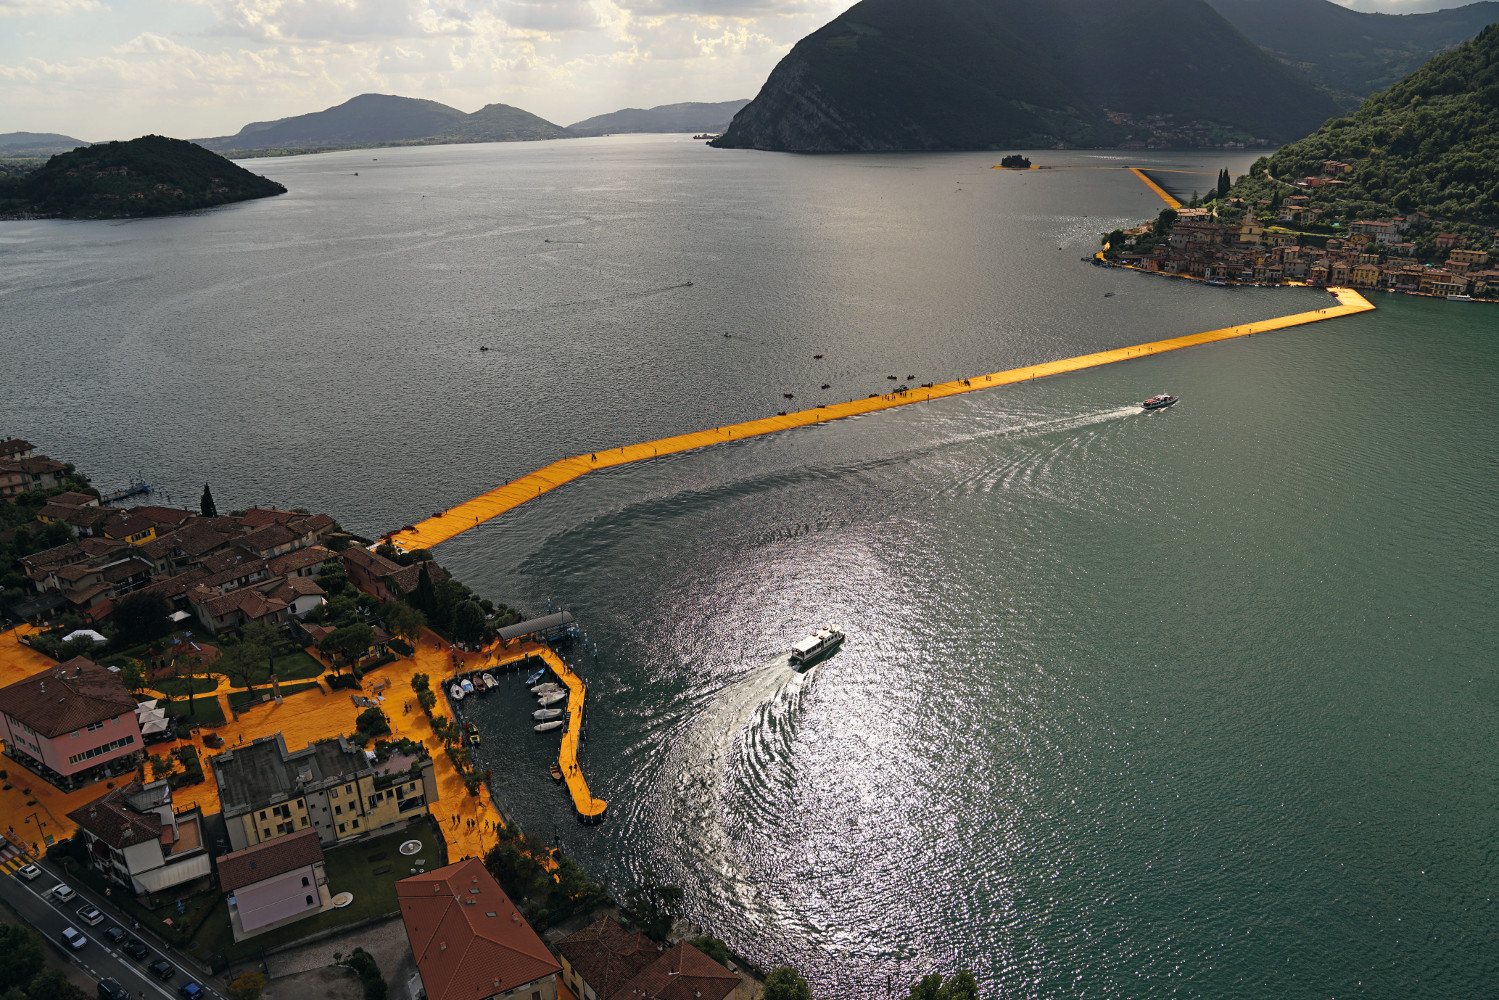 Wolfgang Volz || Christo || Floating Piers